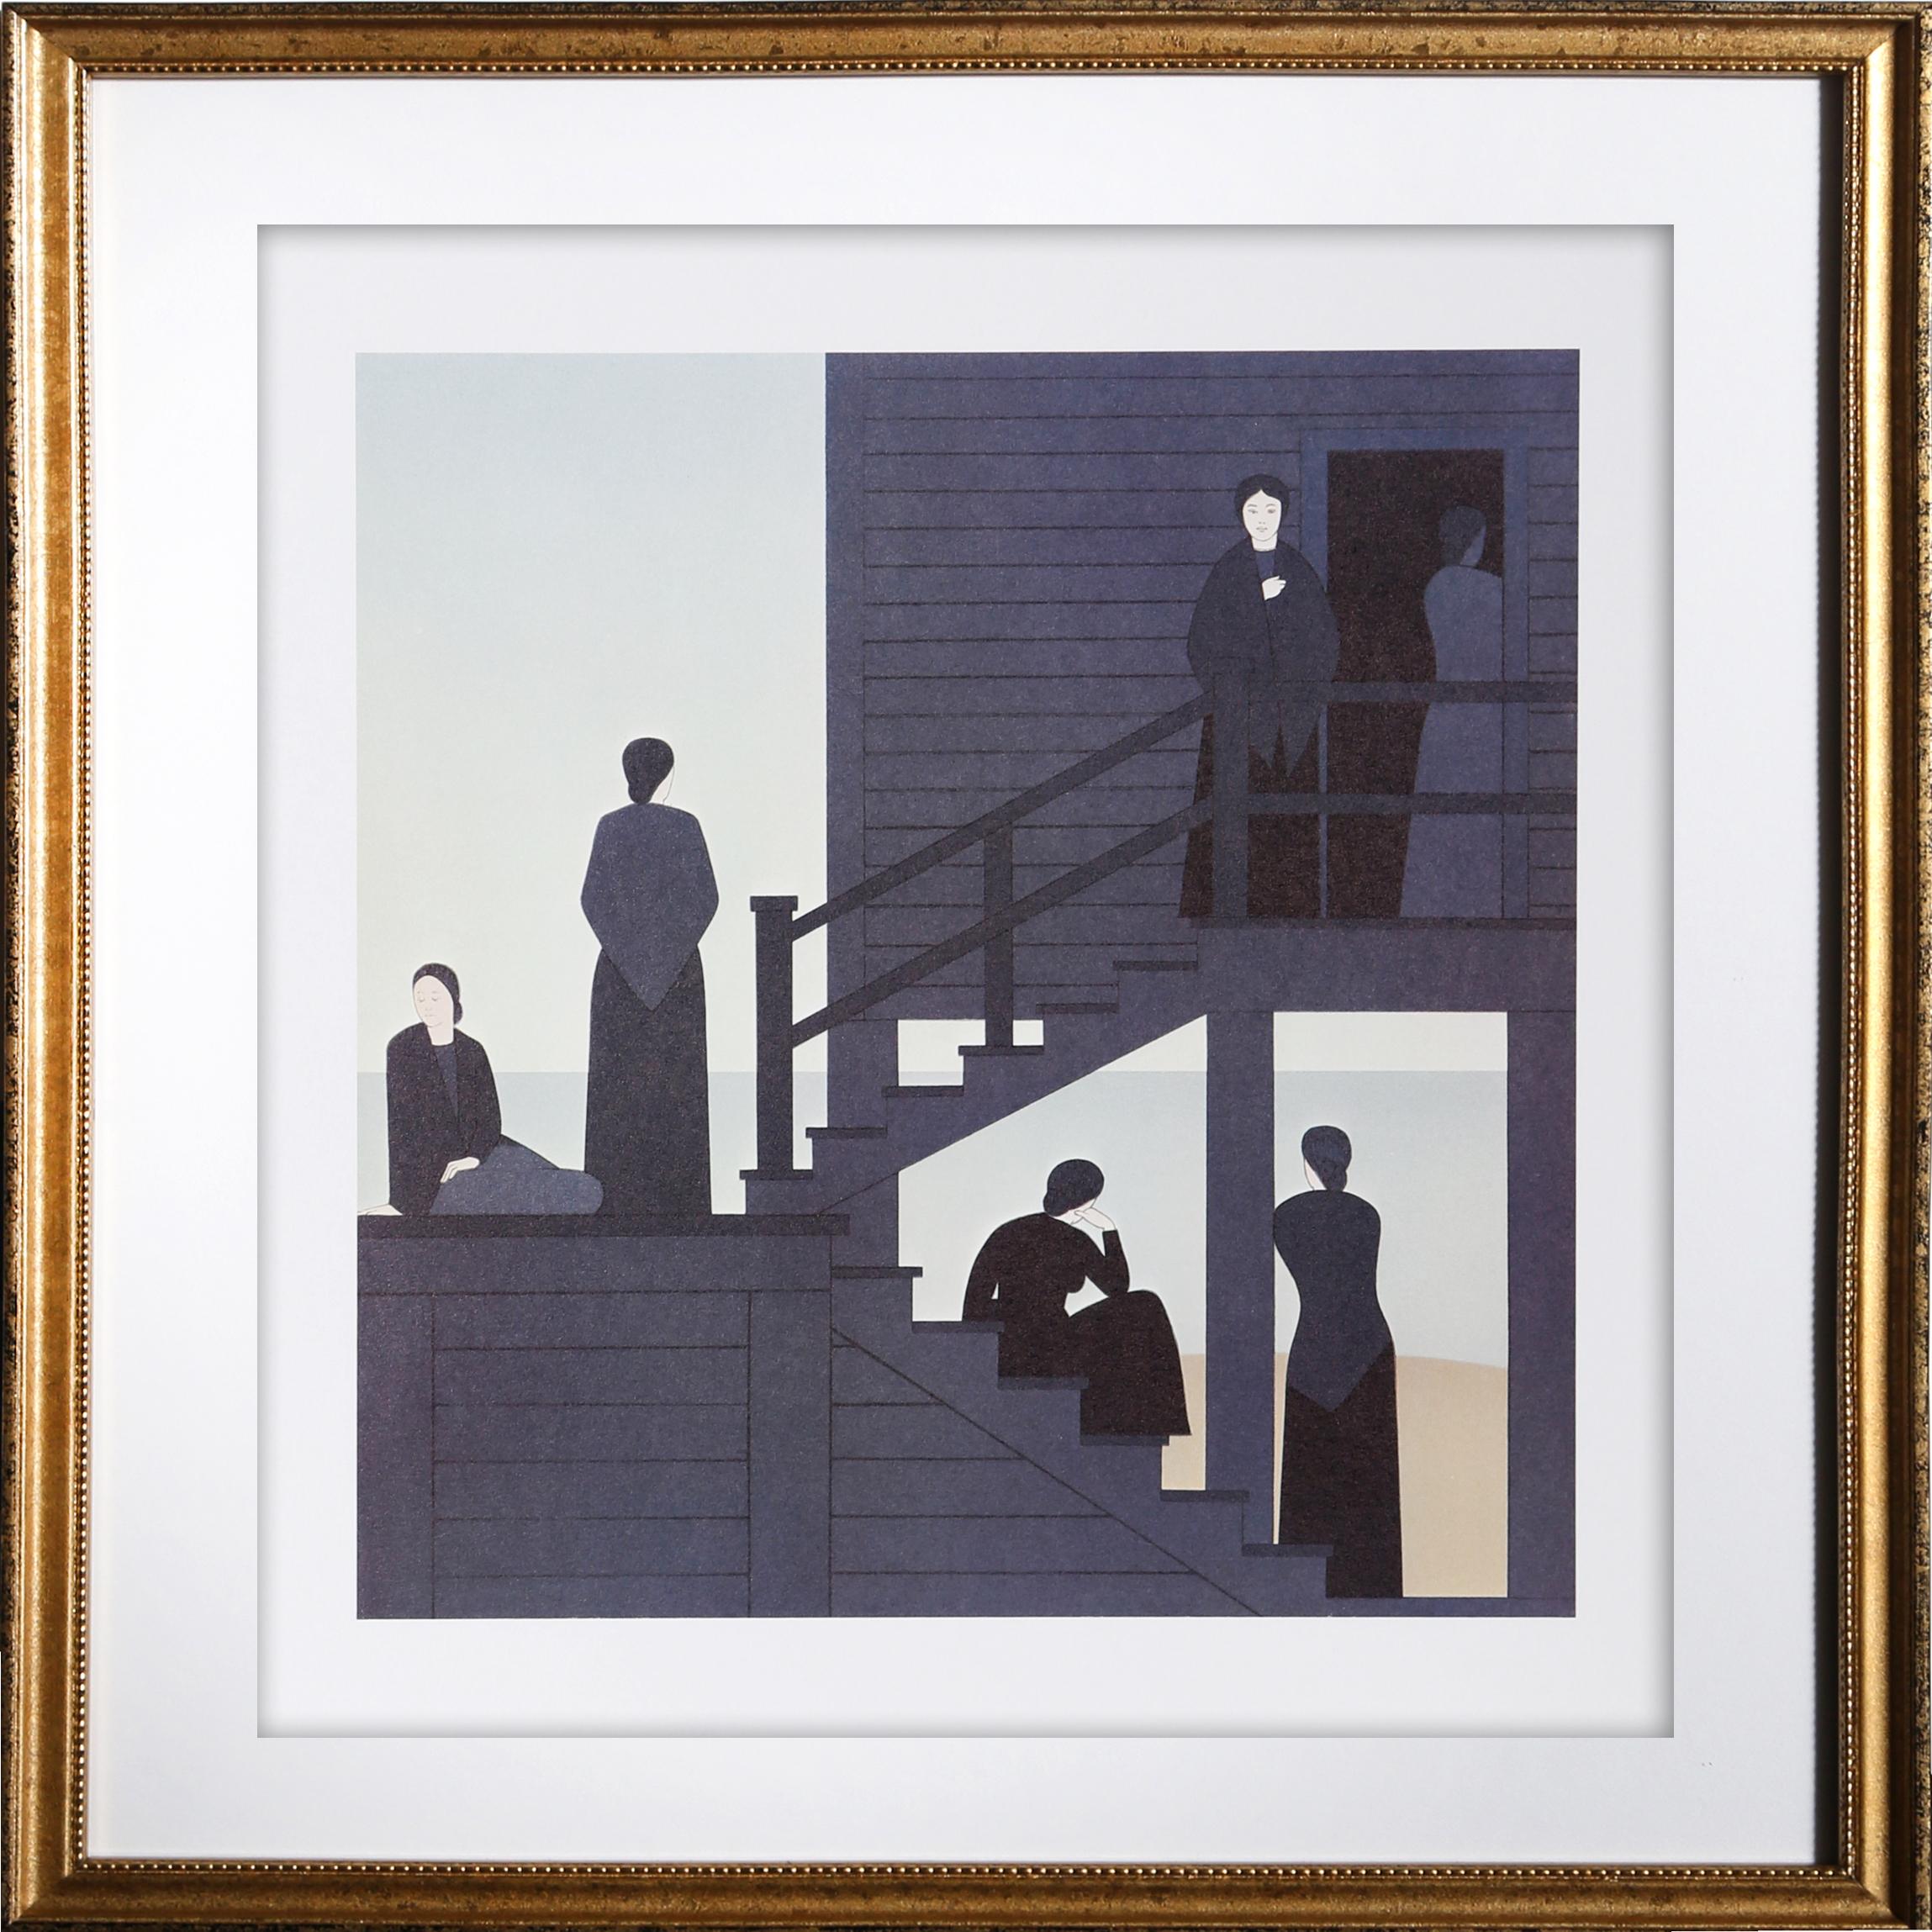 Waiting from the Kent Bicentennial Portfolio
Will Barnet, American (1911–2012)
Date: 1975
Offset Lithograph (unsigned as issued)
Image Size: 11.25 x 11 inches
Size: 17 x 14 in. (43.18 x 35.56 cm)
Frame Size: 19 x 19 inches
Publisher: Lorillard